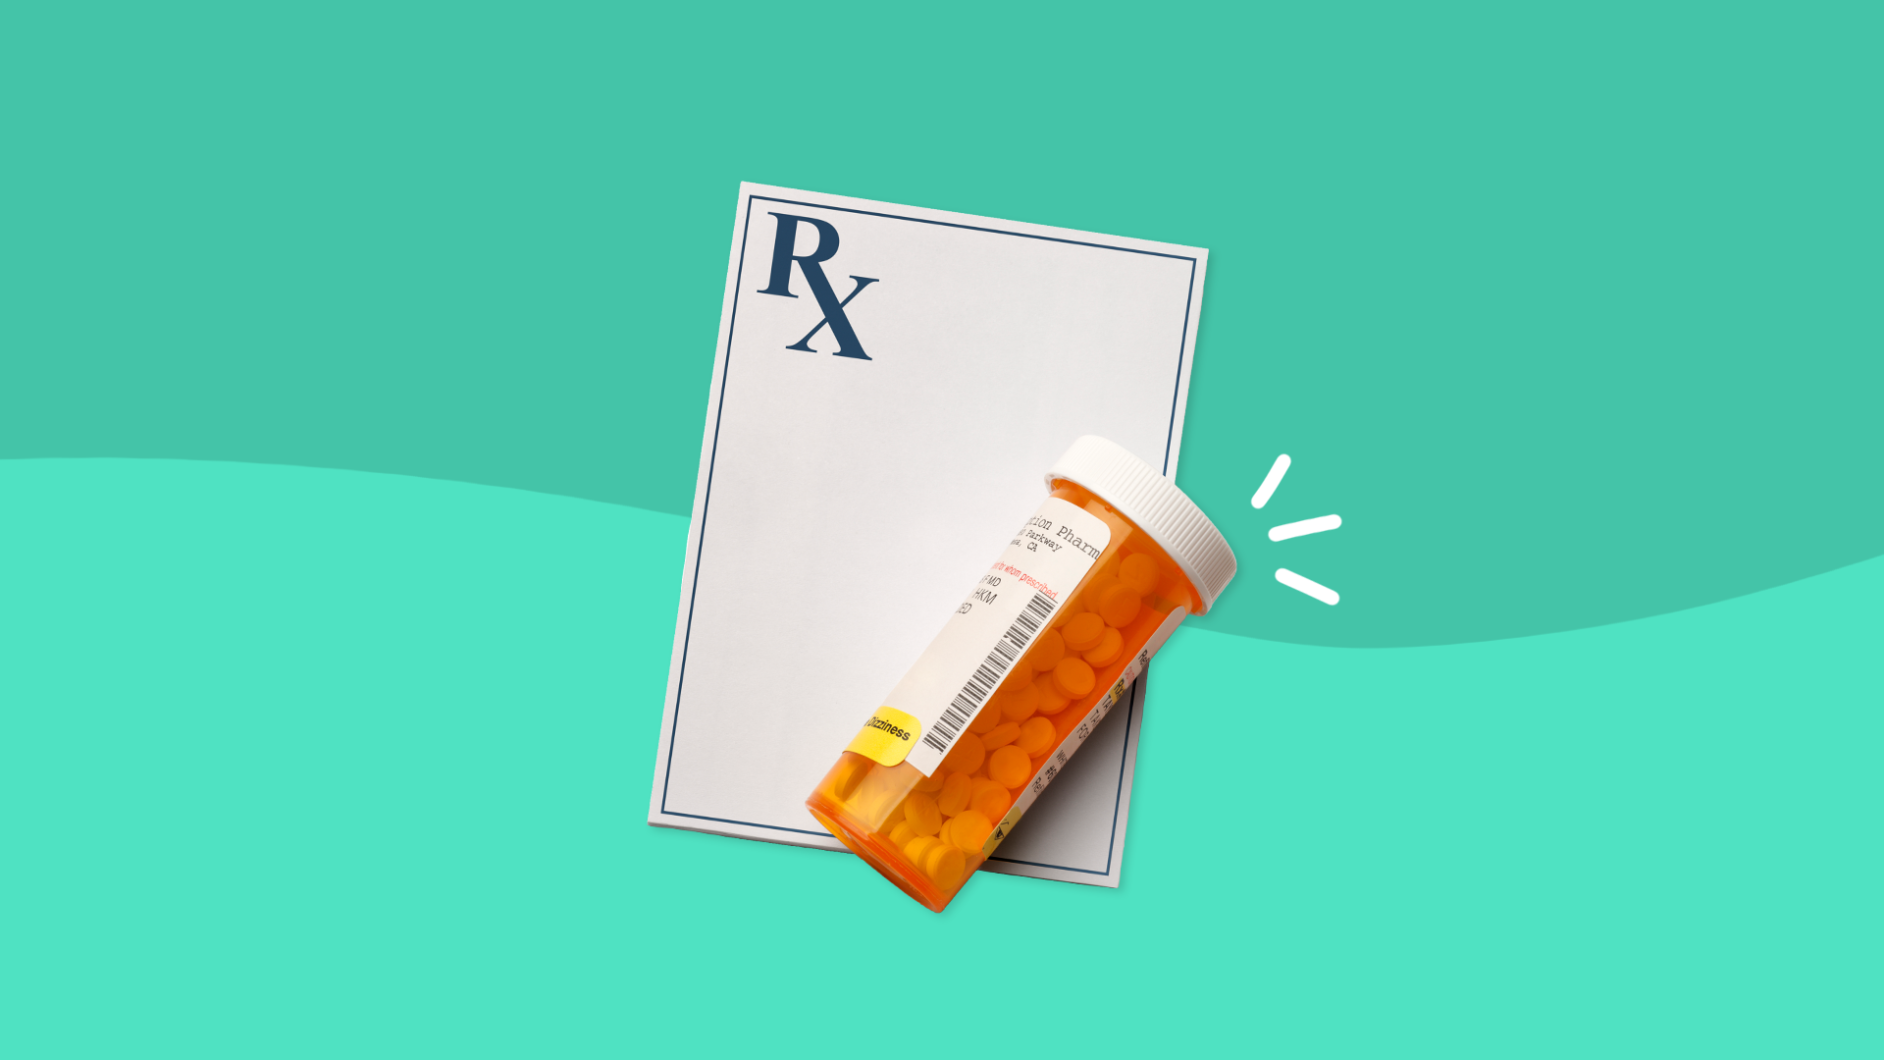 Prescription pad with pill bottle: Common vs. serious Methotrexate side effects